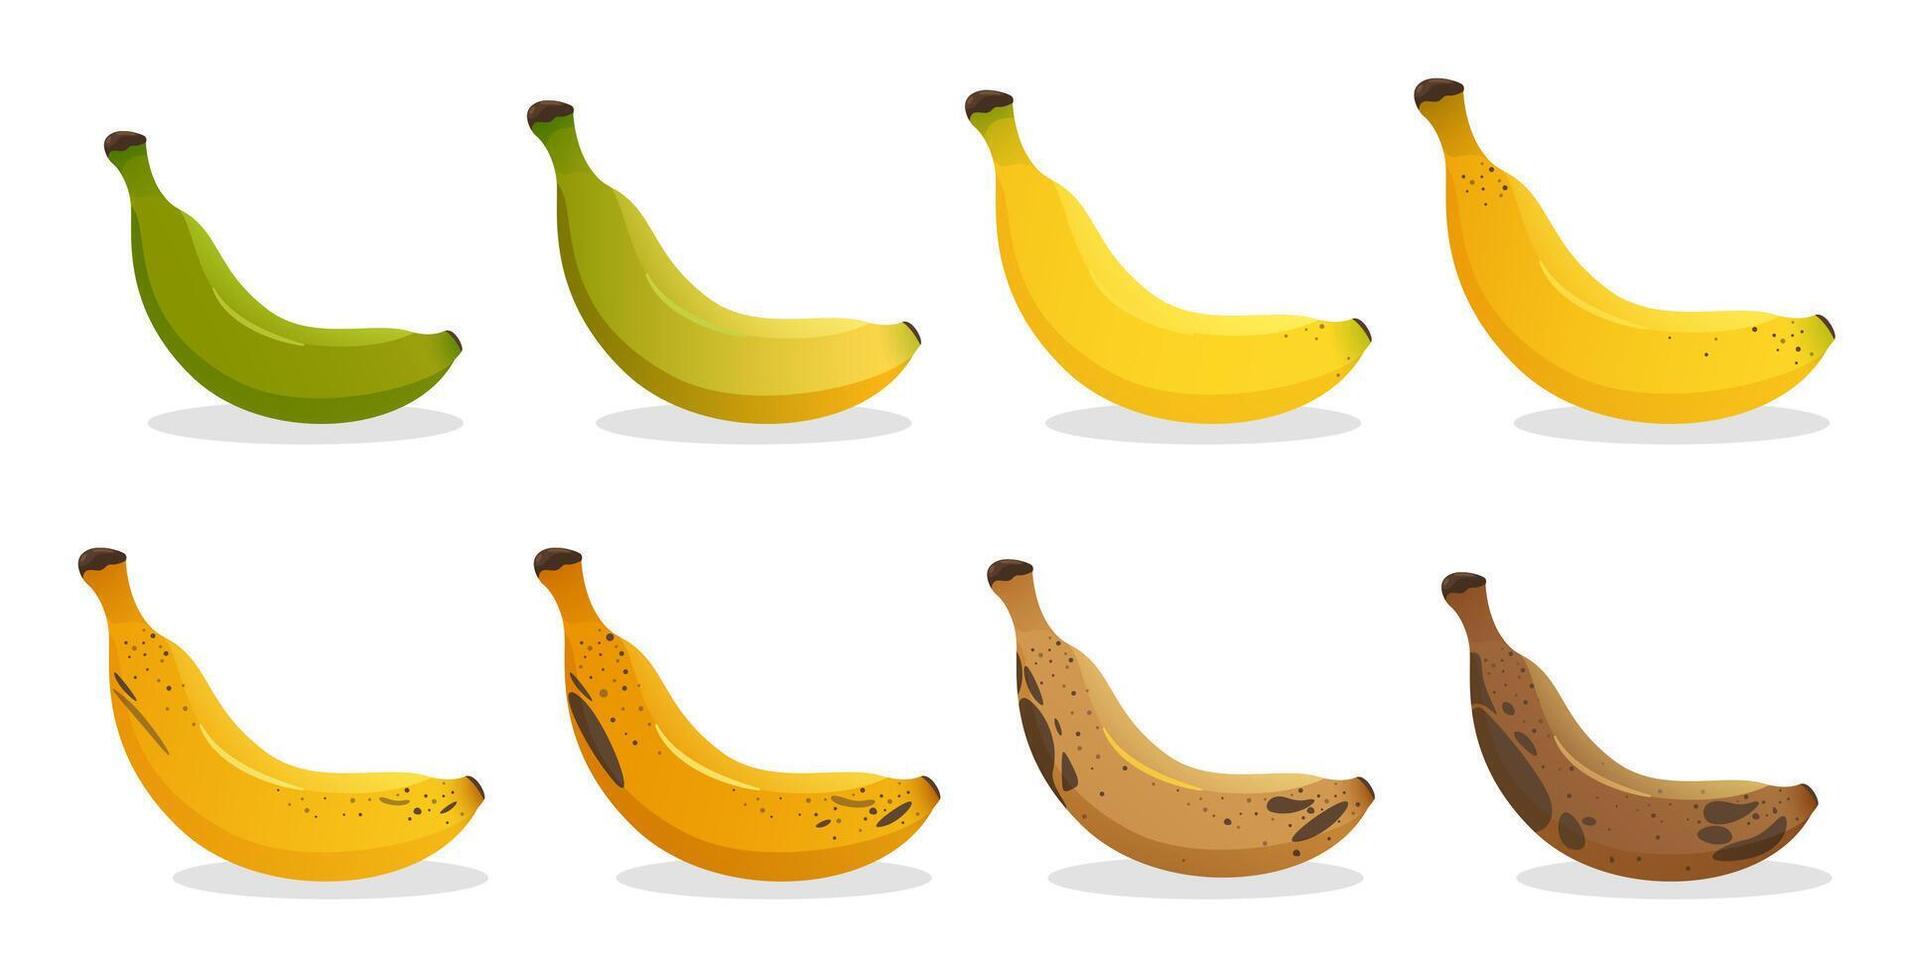 Banana ripeness stages. Different organic fruit peel color from green to brown, organic rotten and fresh ripe fruit. Vegetarian healthy food vector set